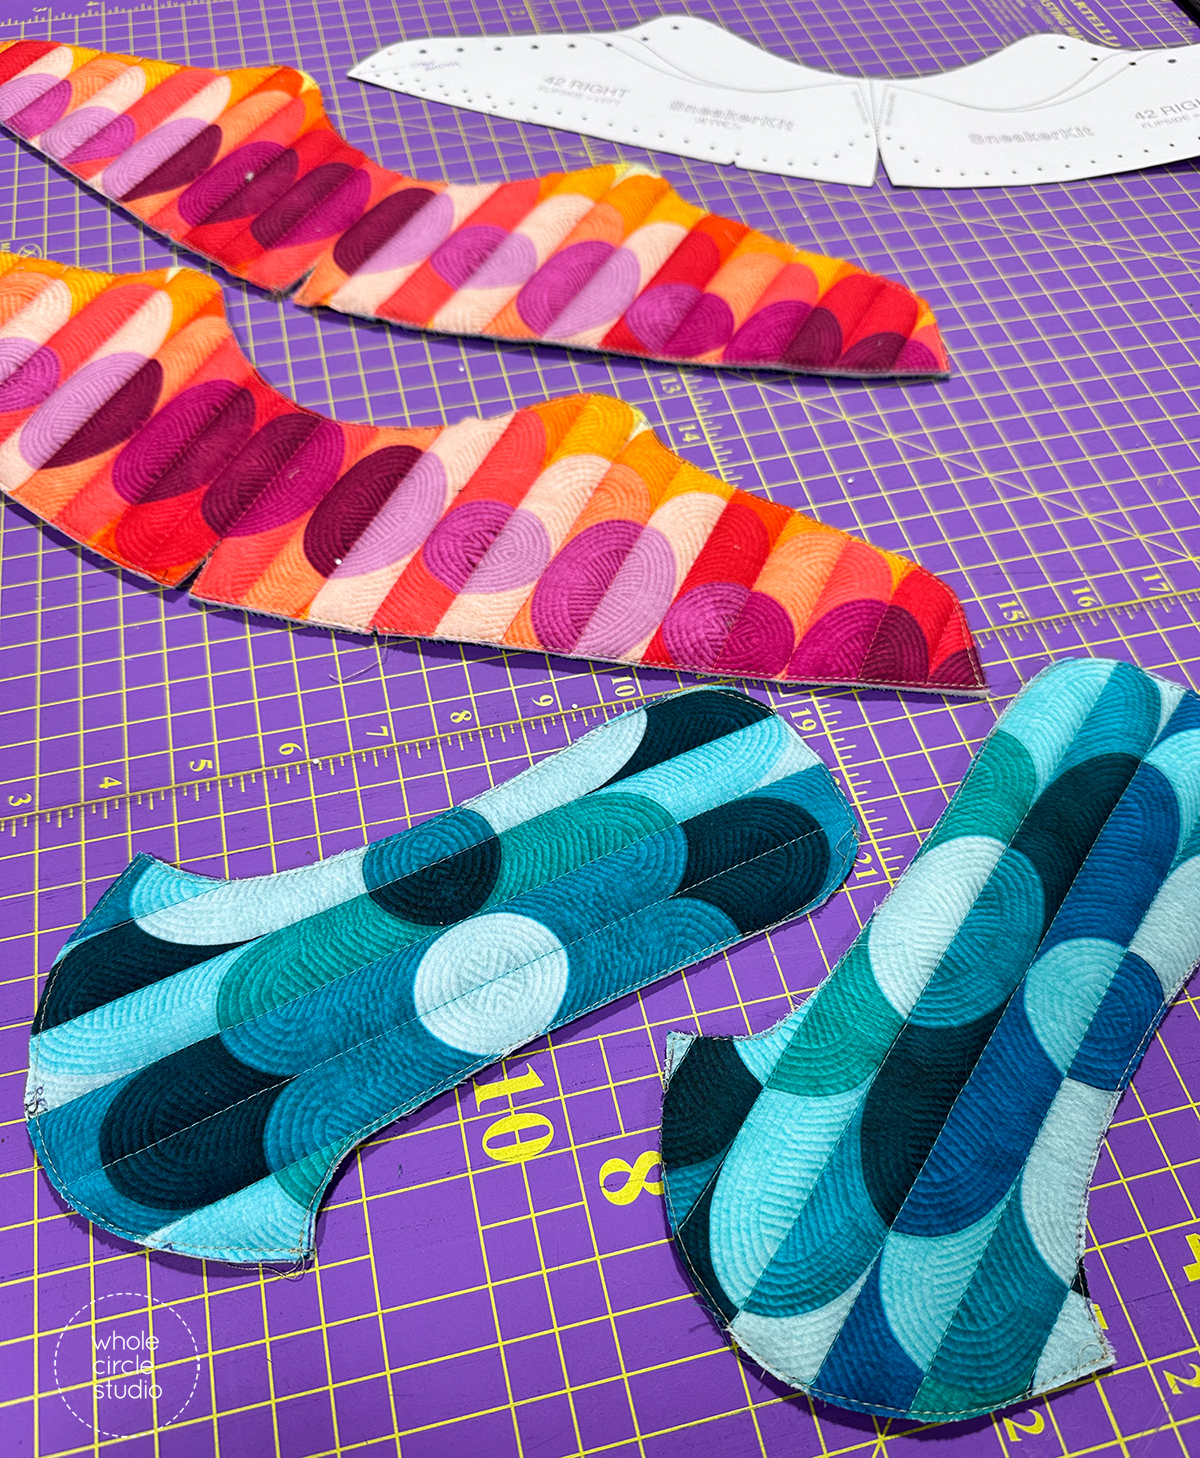 cutouts of colorful graphic fabric